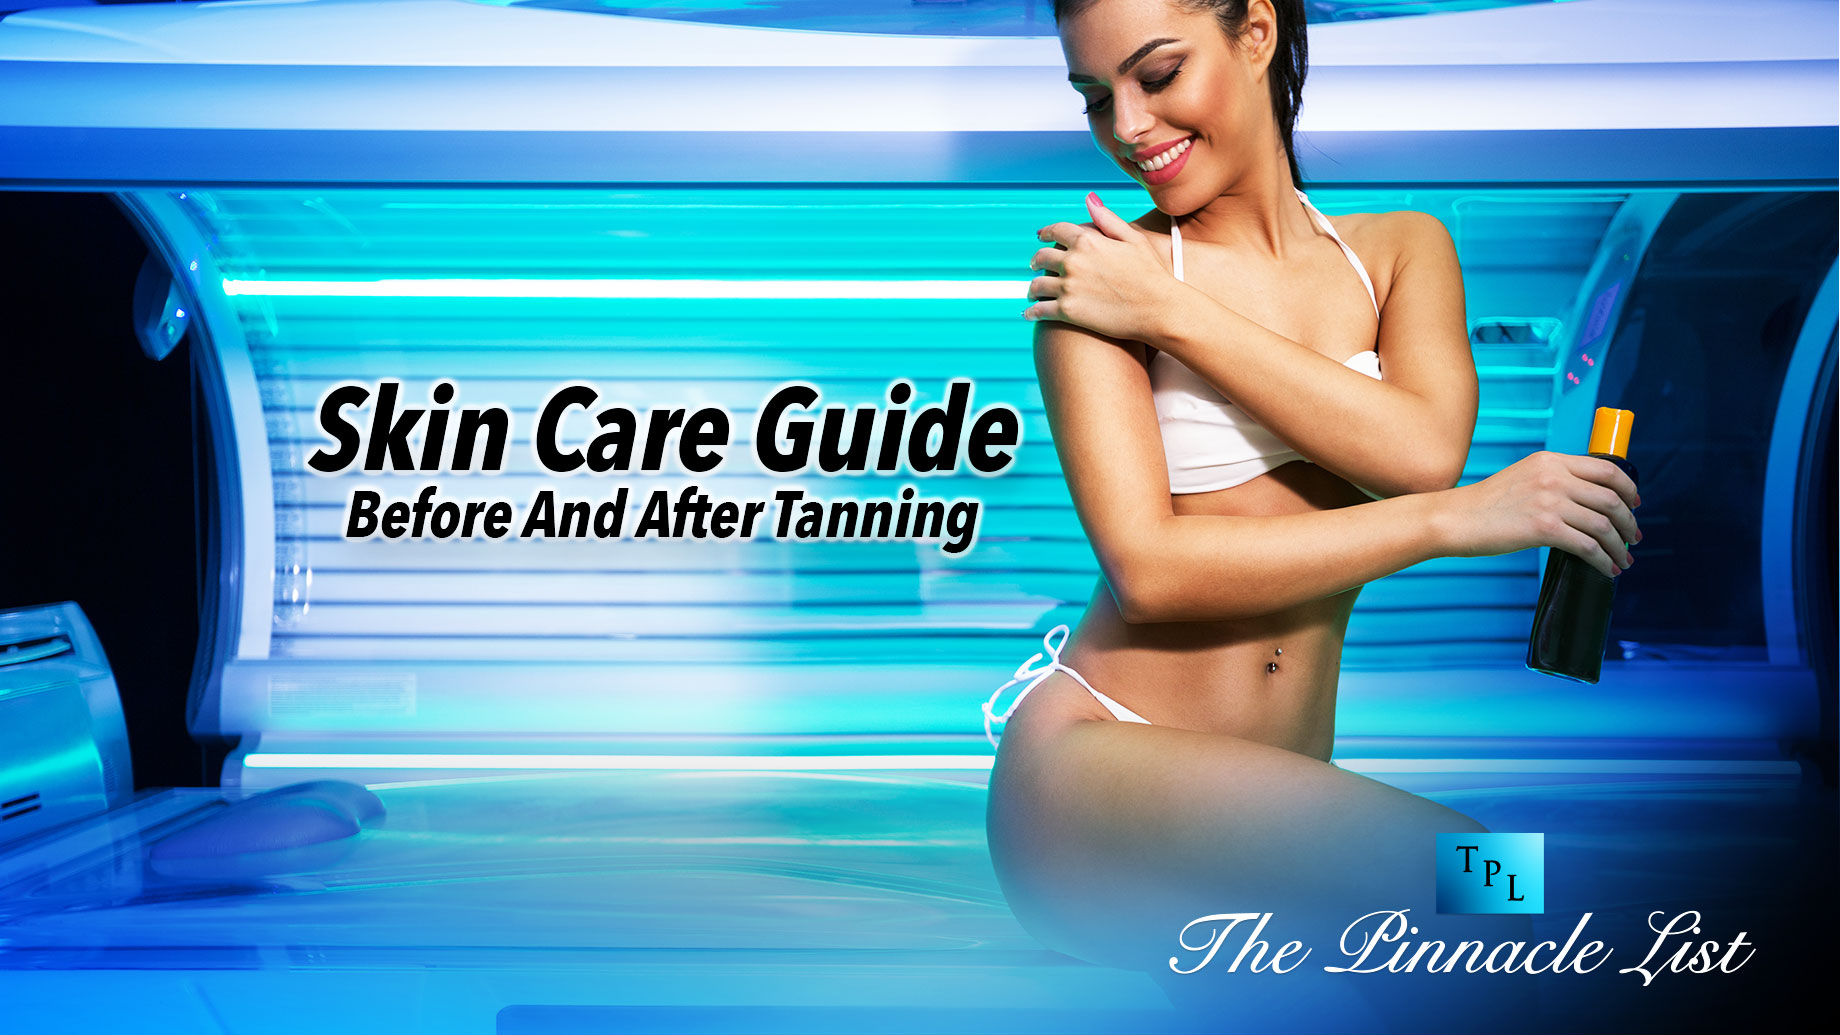 Skin Care Guide: Before And After Tanning